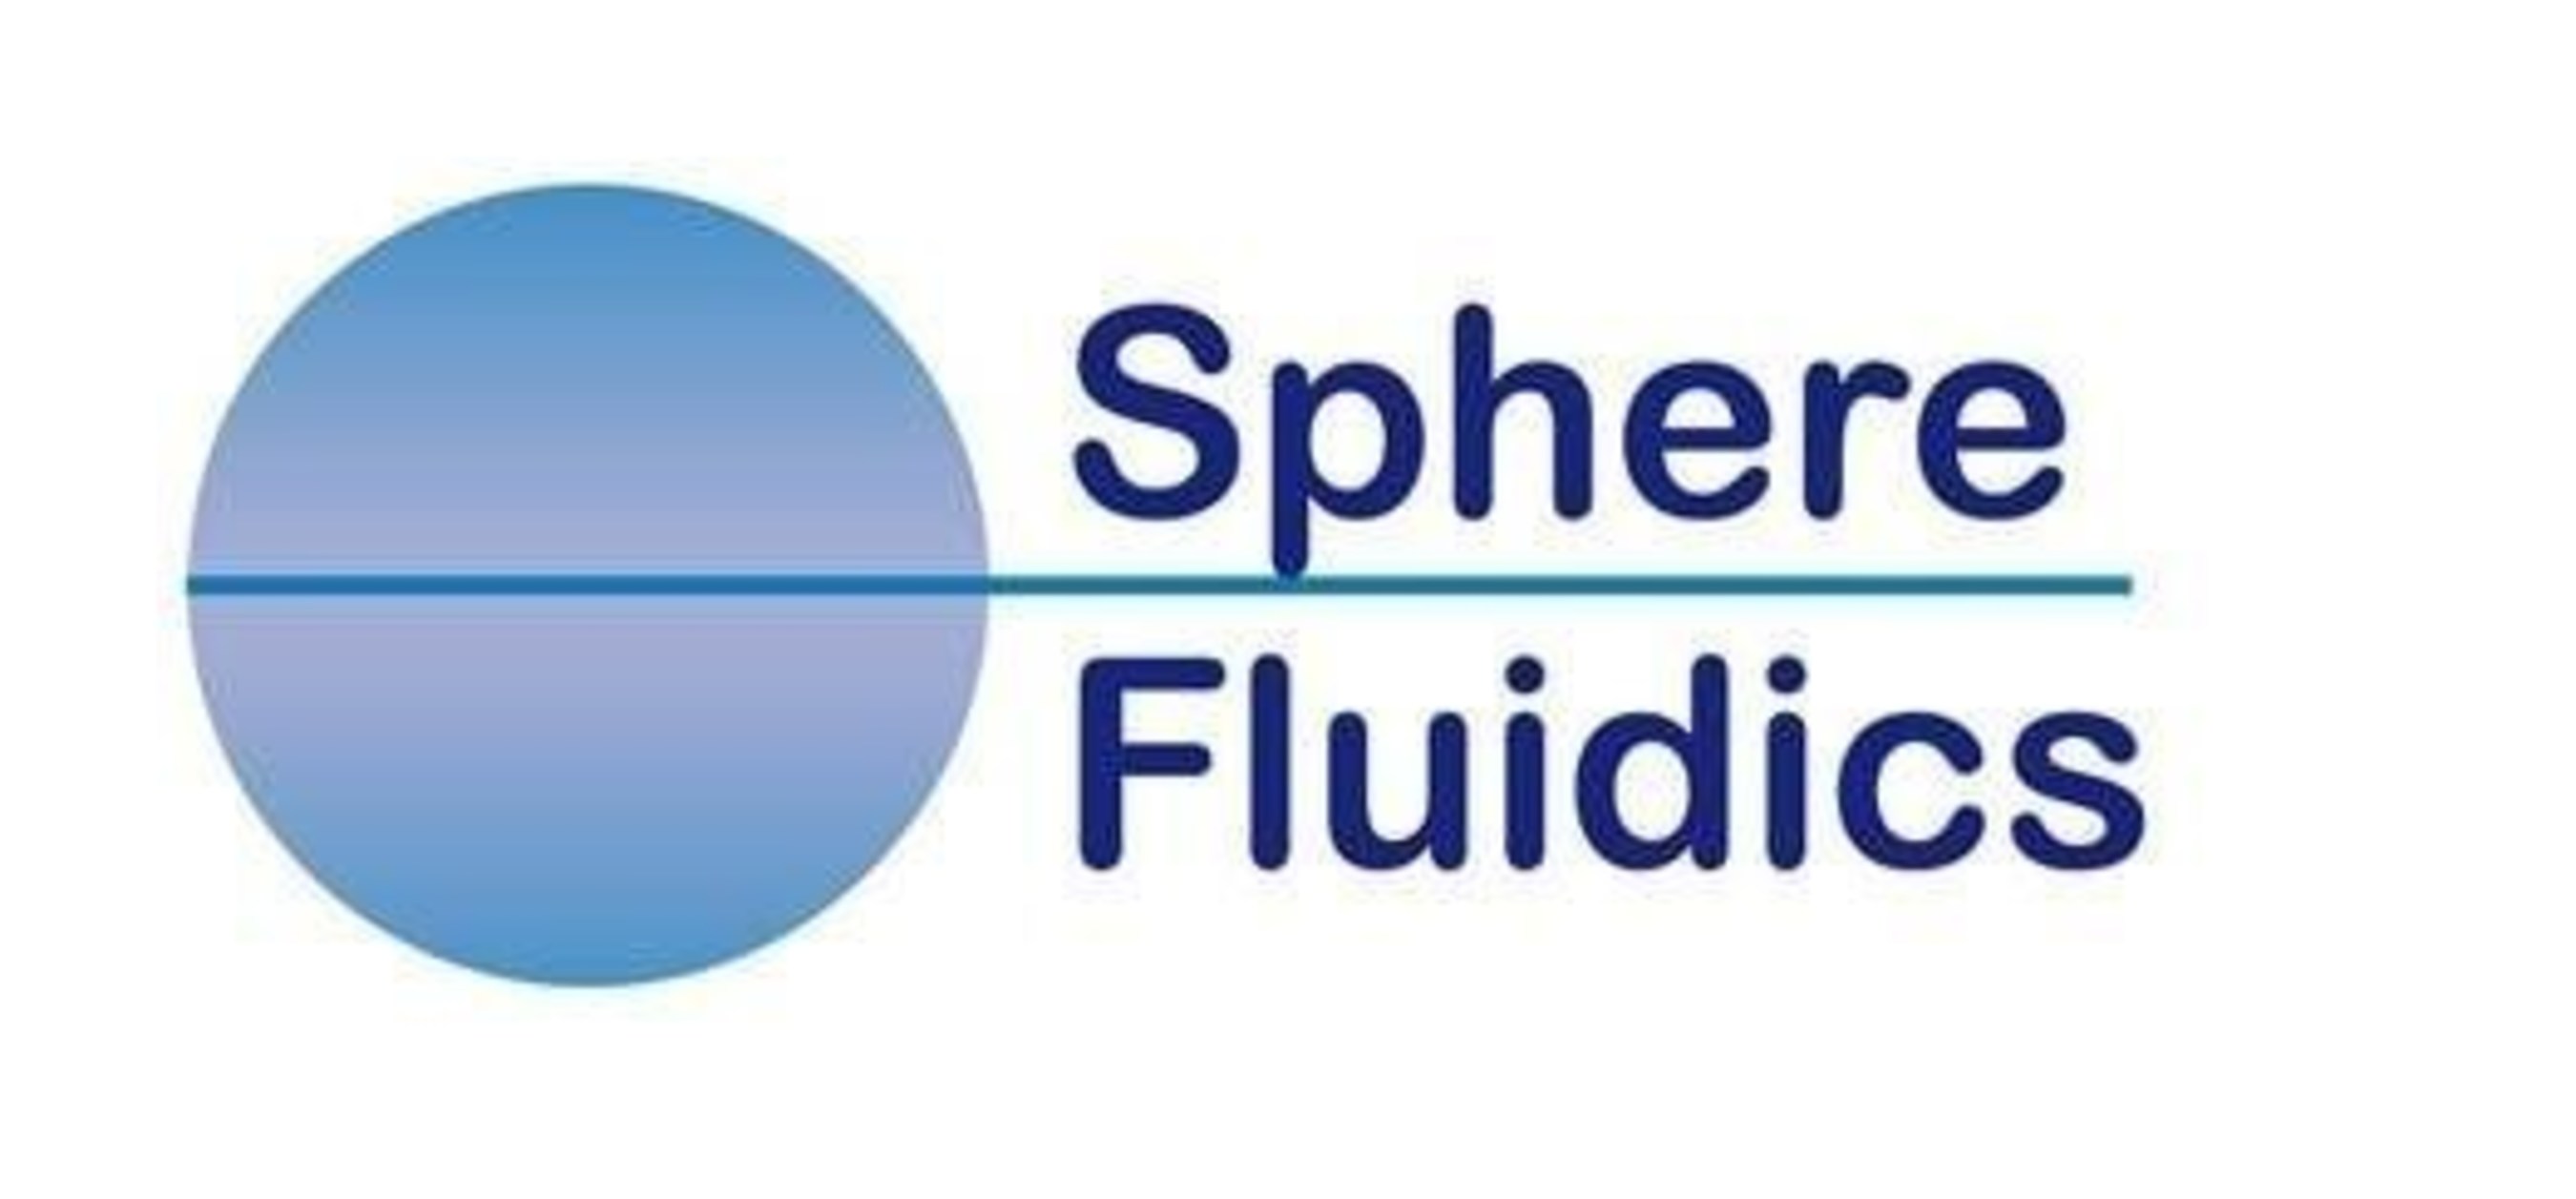 Sphere Fluidics raises $7 M for launch of Cyto-Mine® single cell analysis system